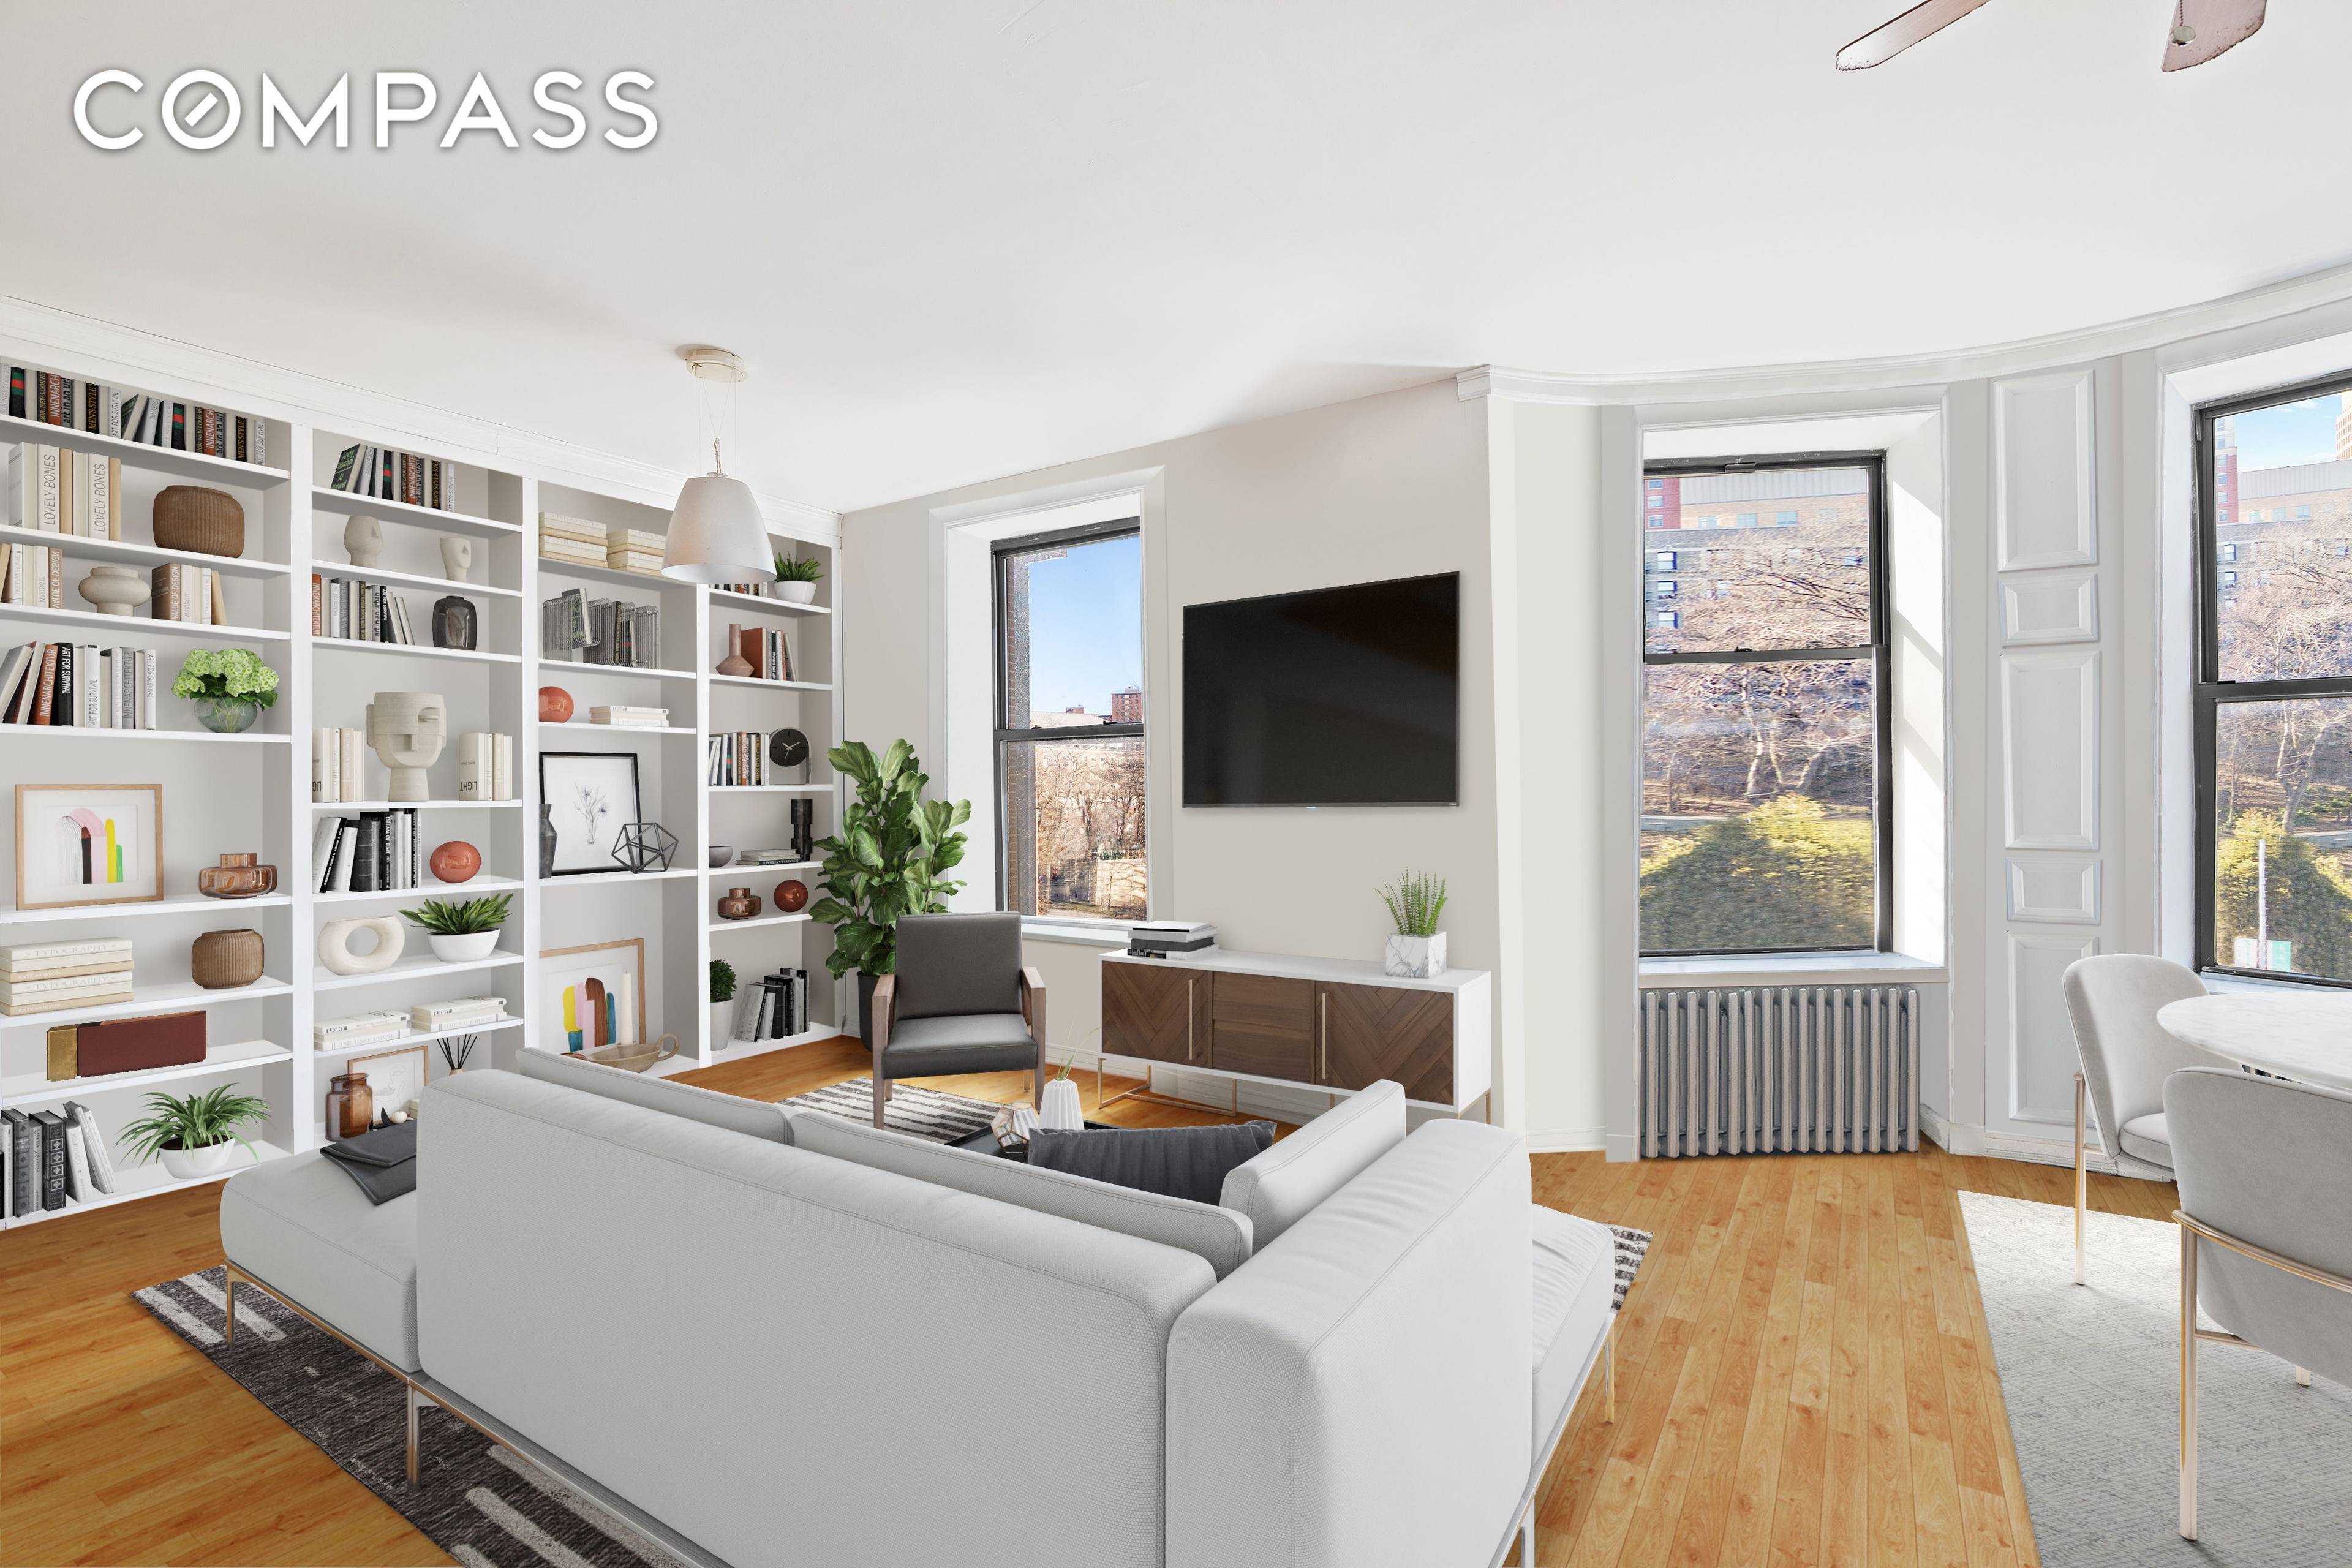 Welcome to this charming 3 bed, 1 bath HDFC co op offering extremely low maintenance amp ; views of Morningside Park right from your living room !